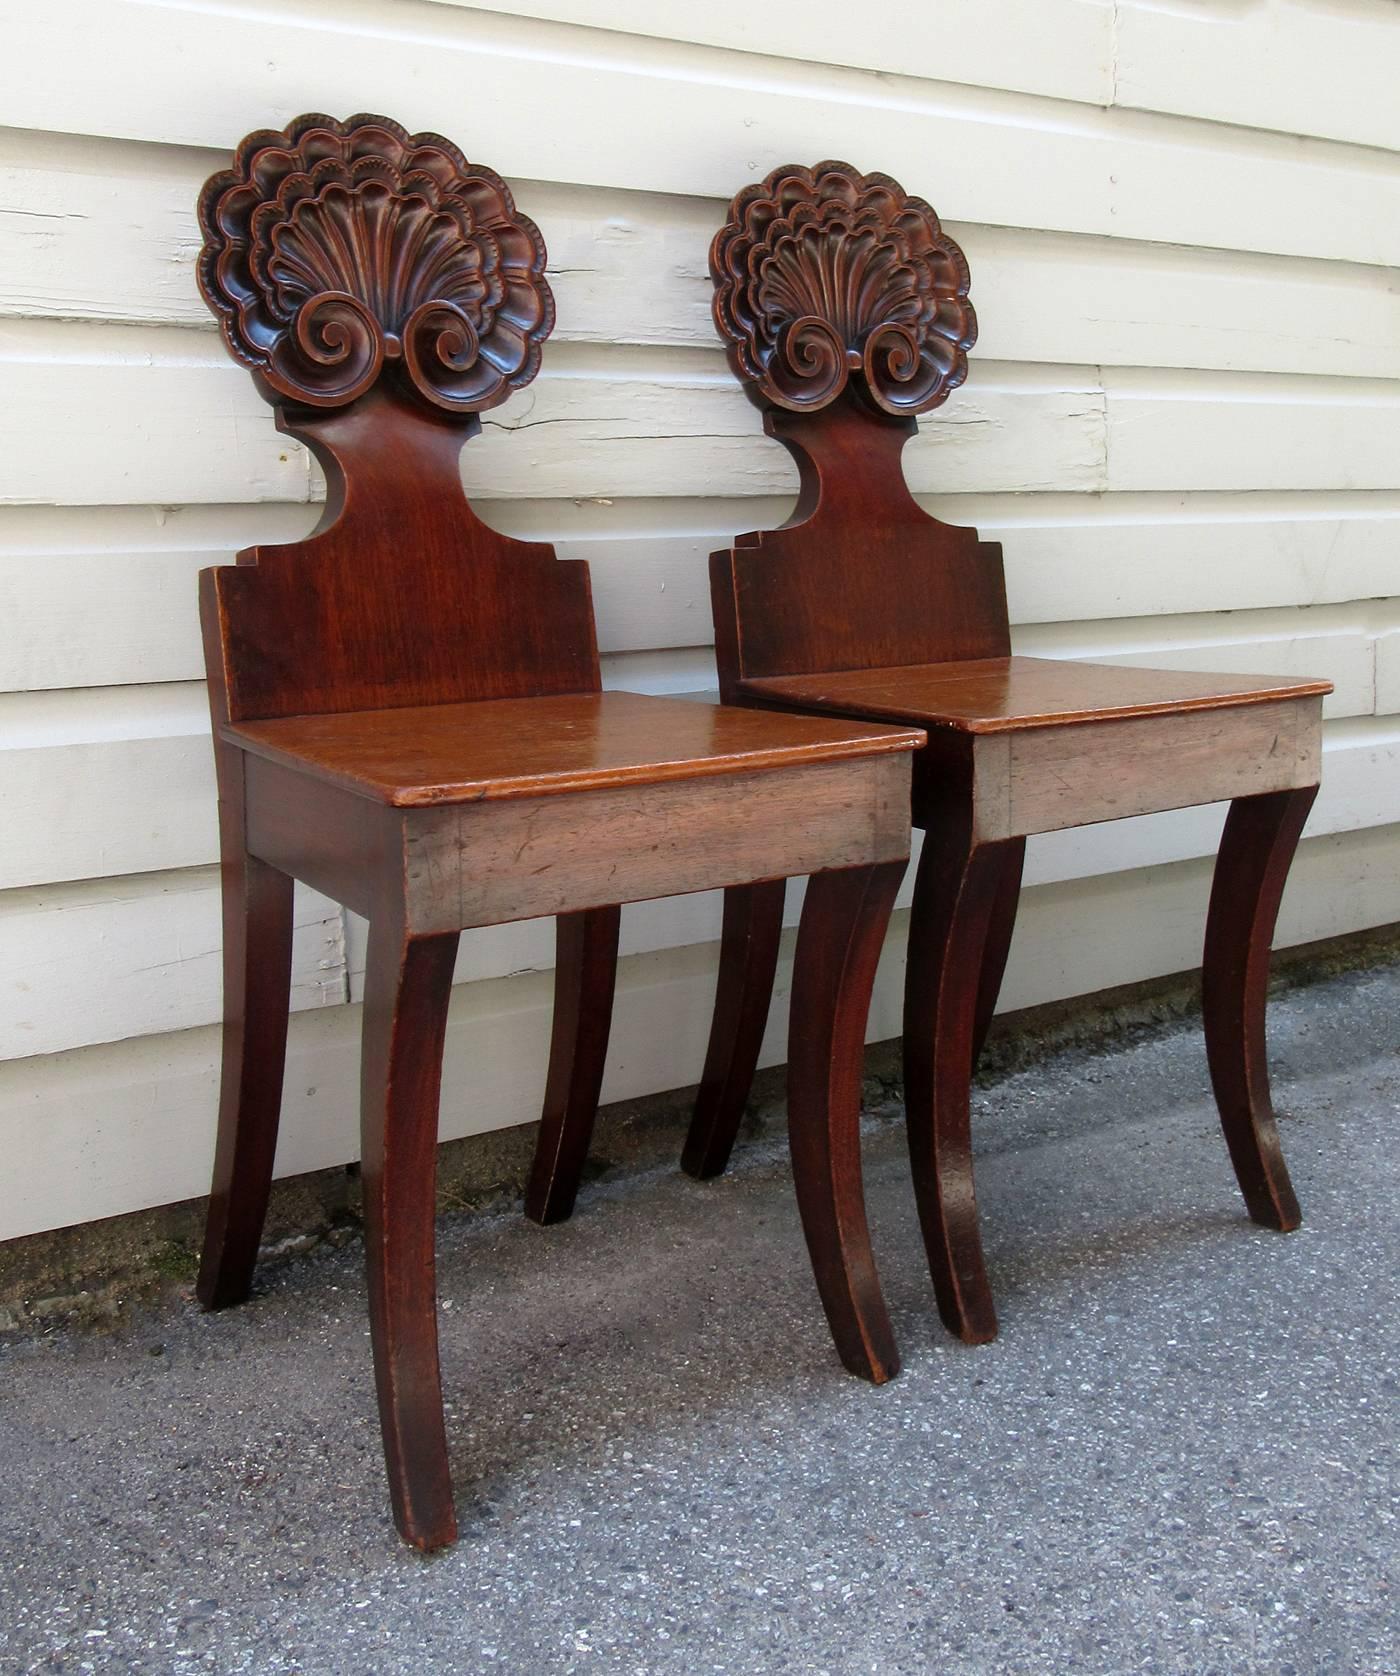 A pair of 19th century English William IV mahogany hall chairs, circa 1830, attributed to noted furniture maker Gillows of London and featuring an intricately carved stylized shell back with sabre legs.
 